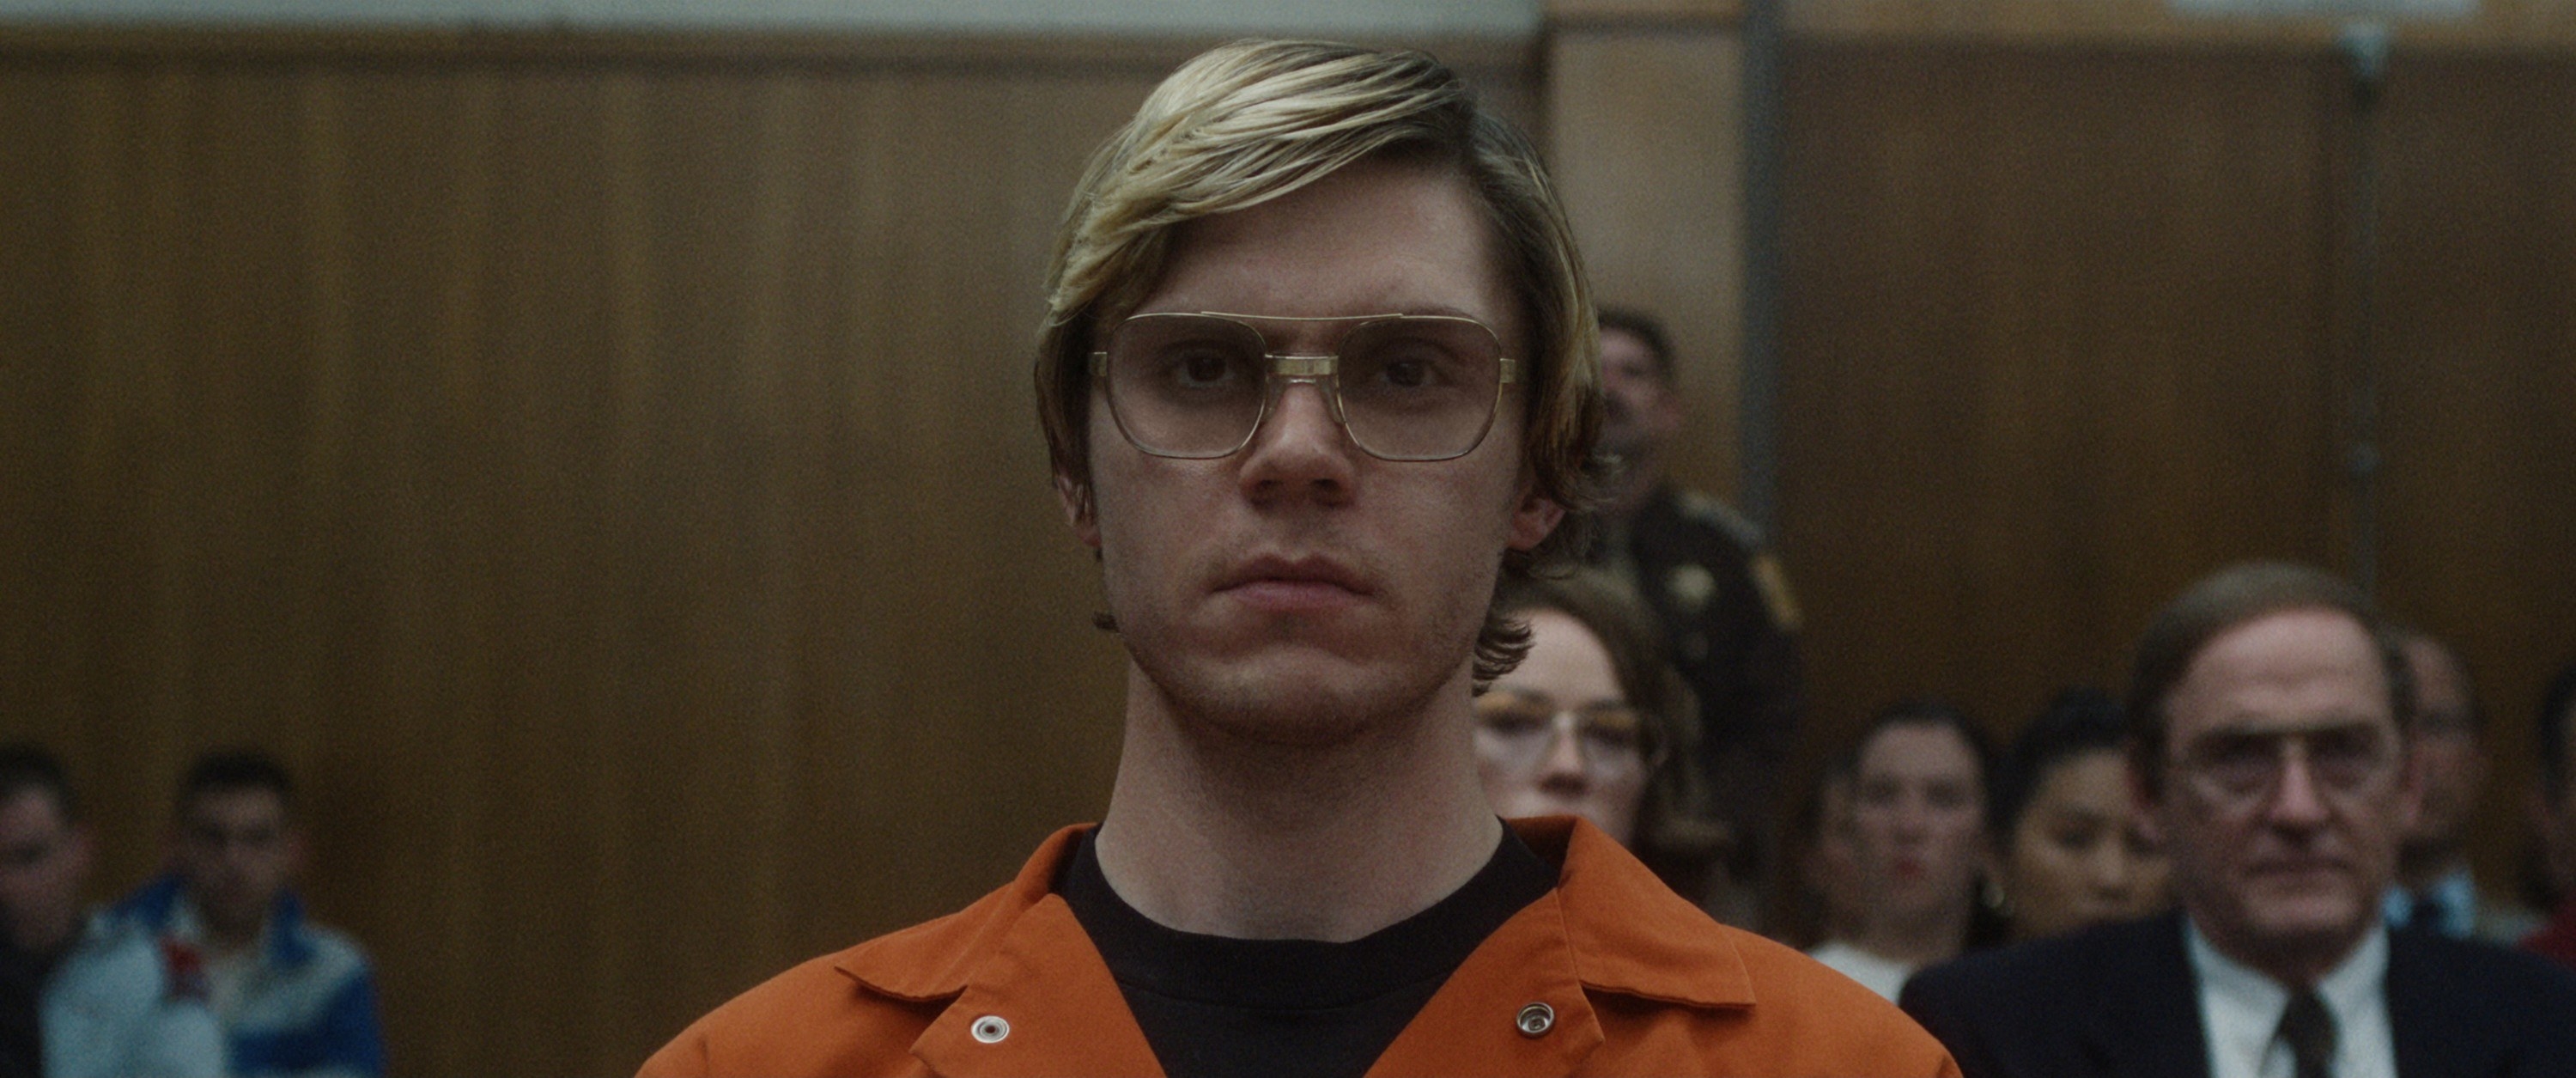 Evan Peters in a courtroom